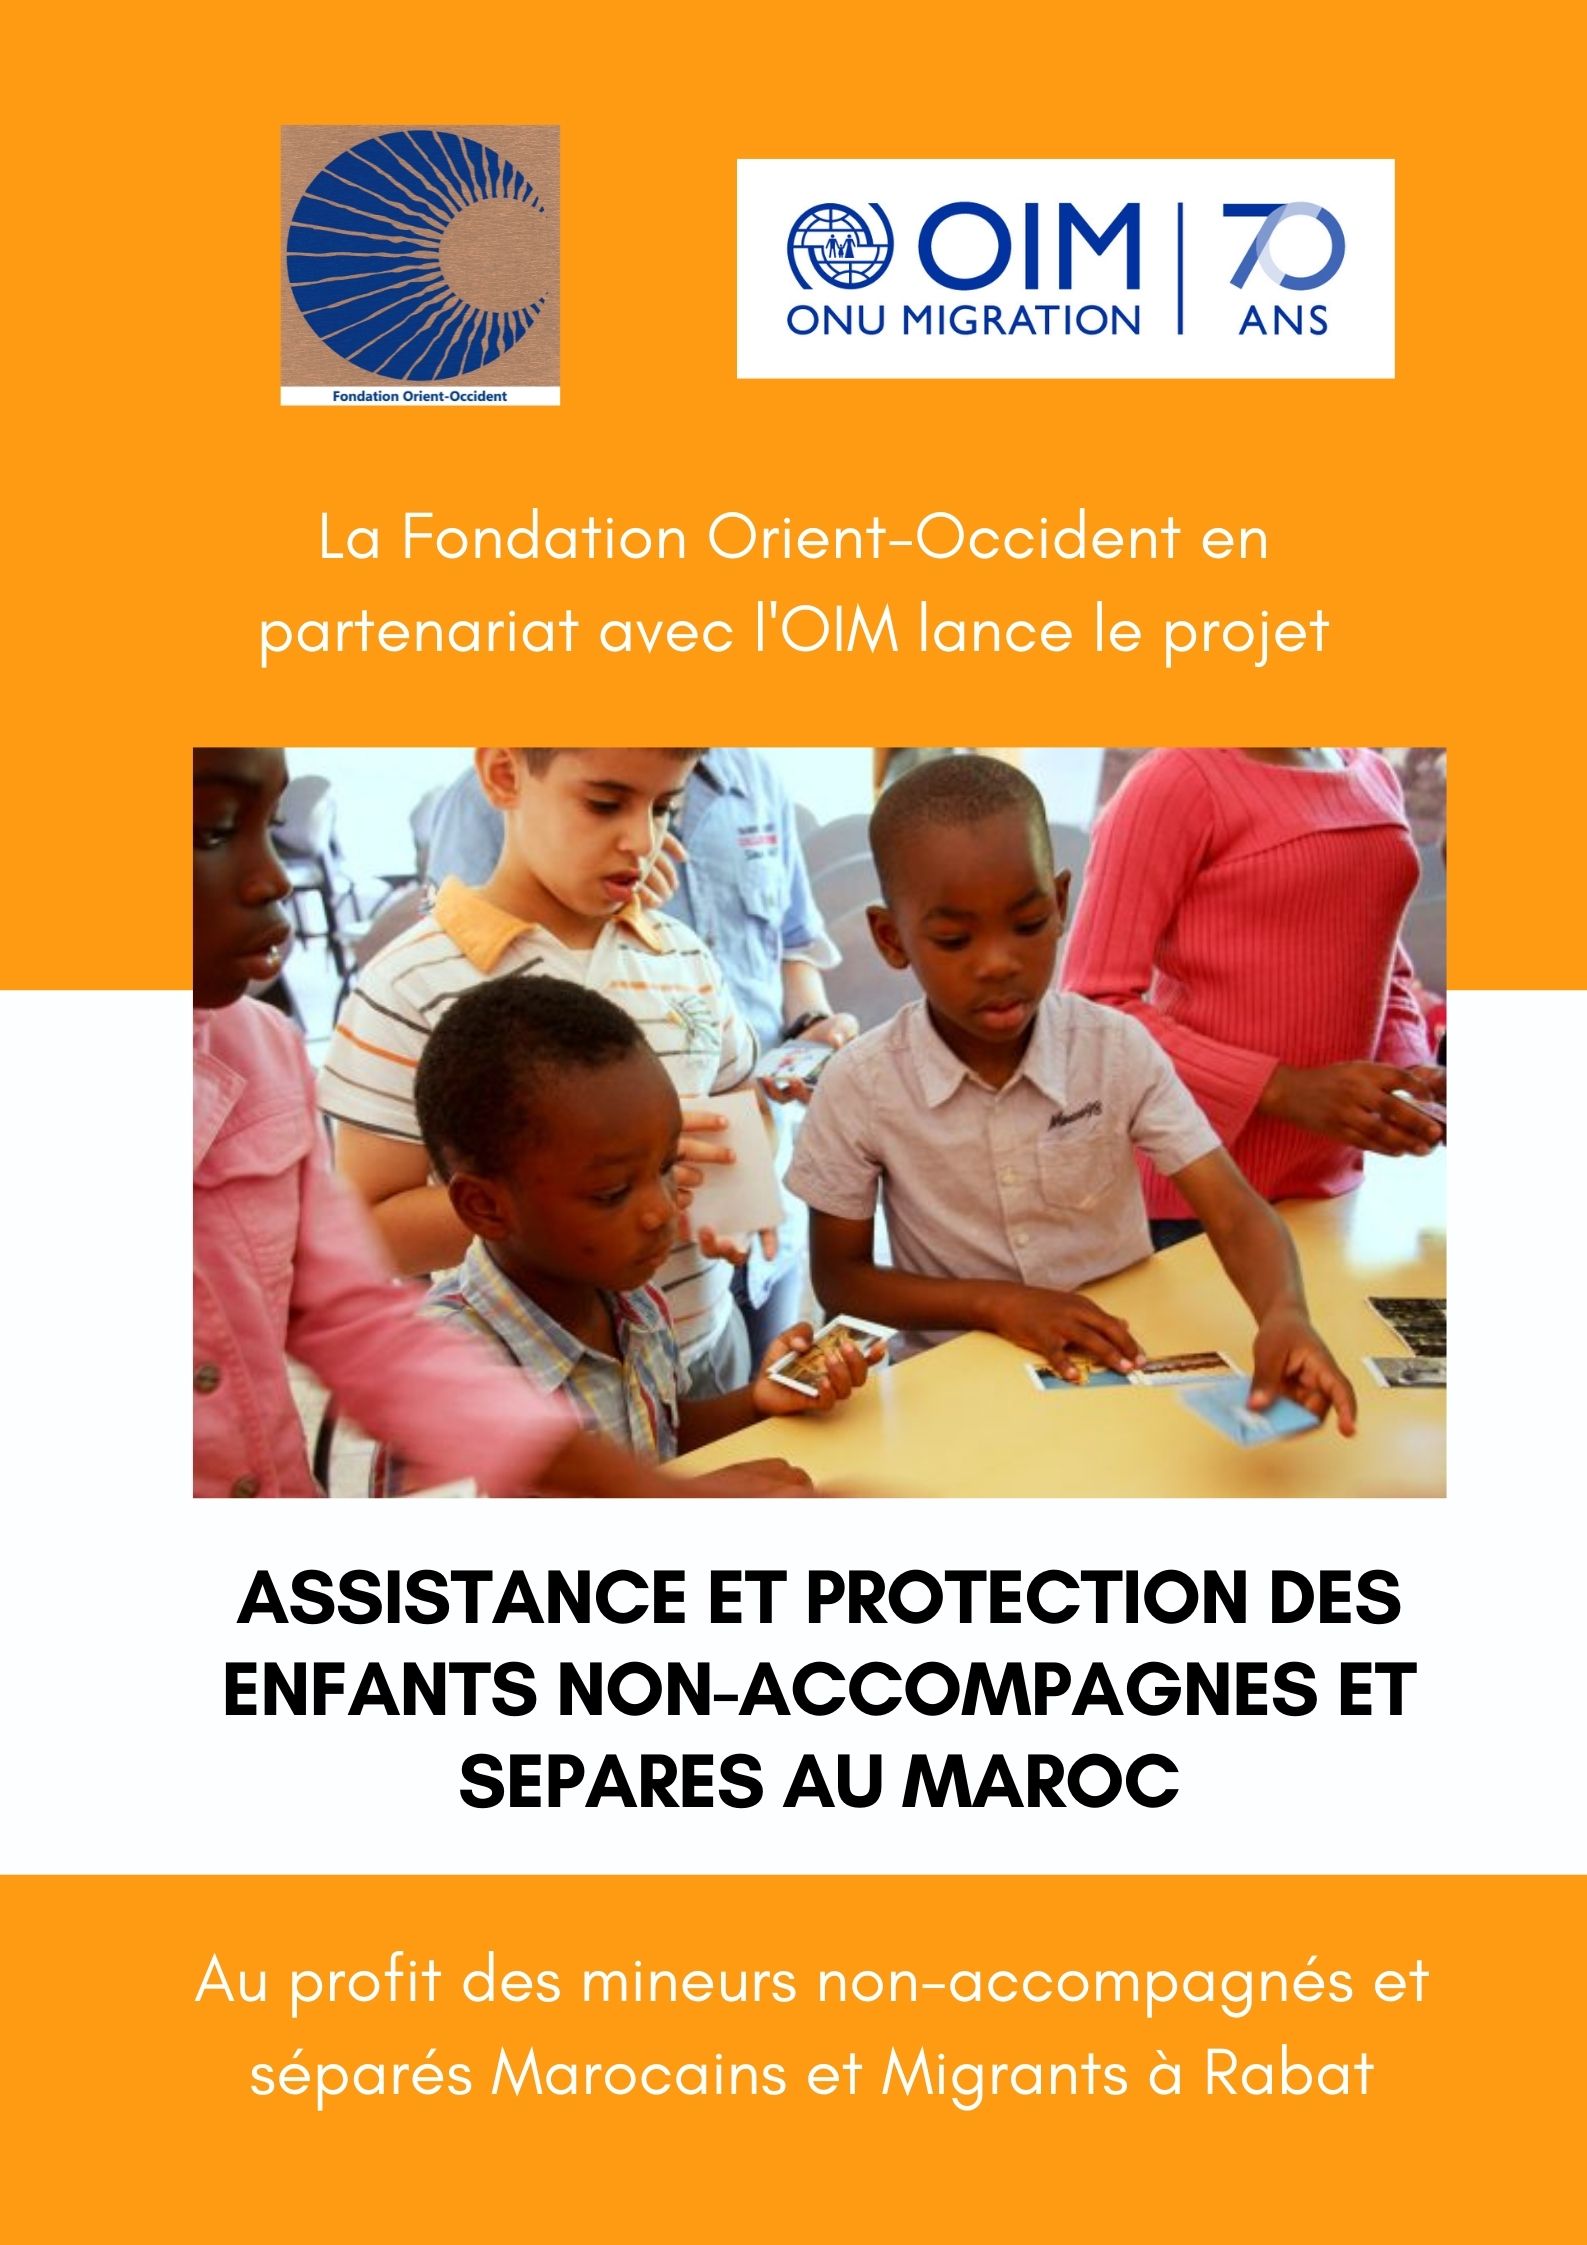 Launch of a new project in partnership with IOM – International Organization for Migration